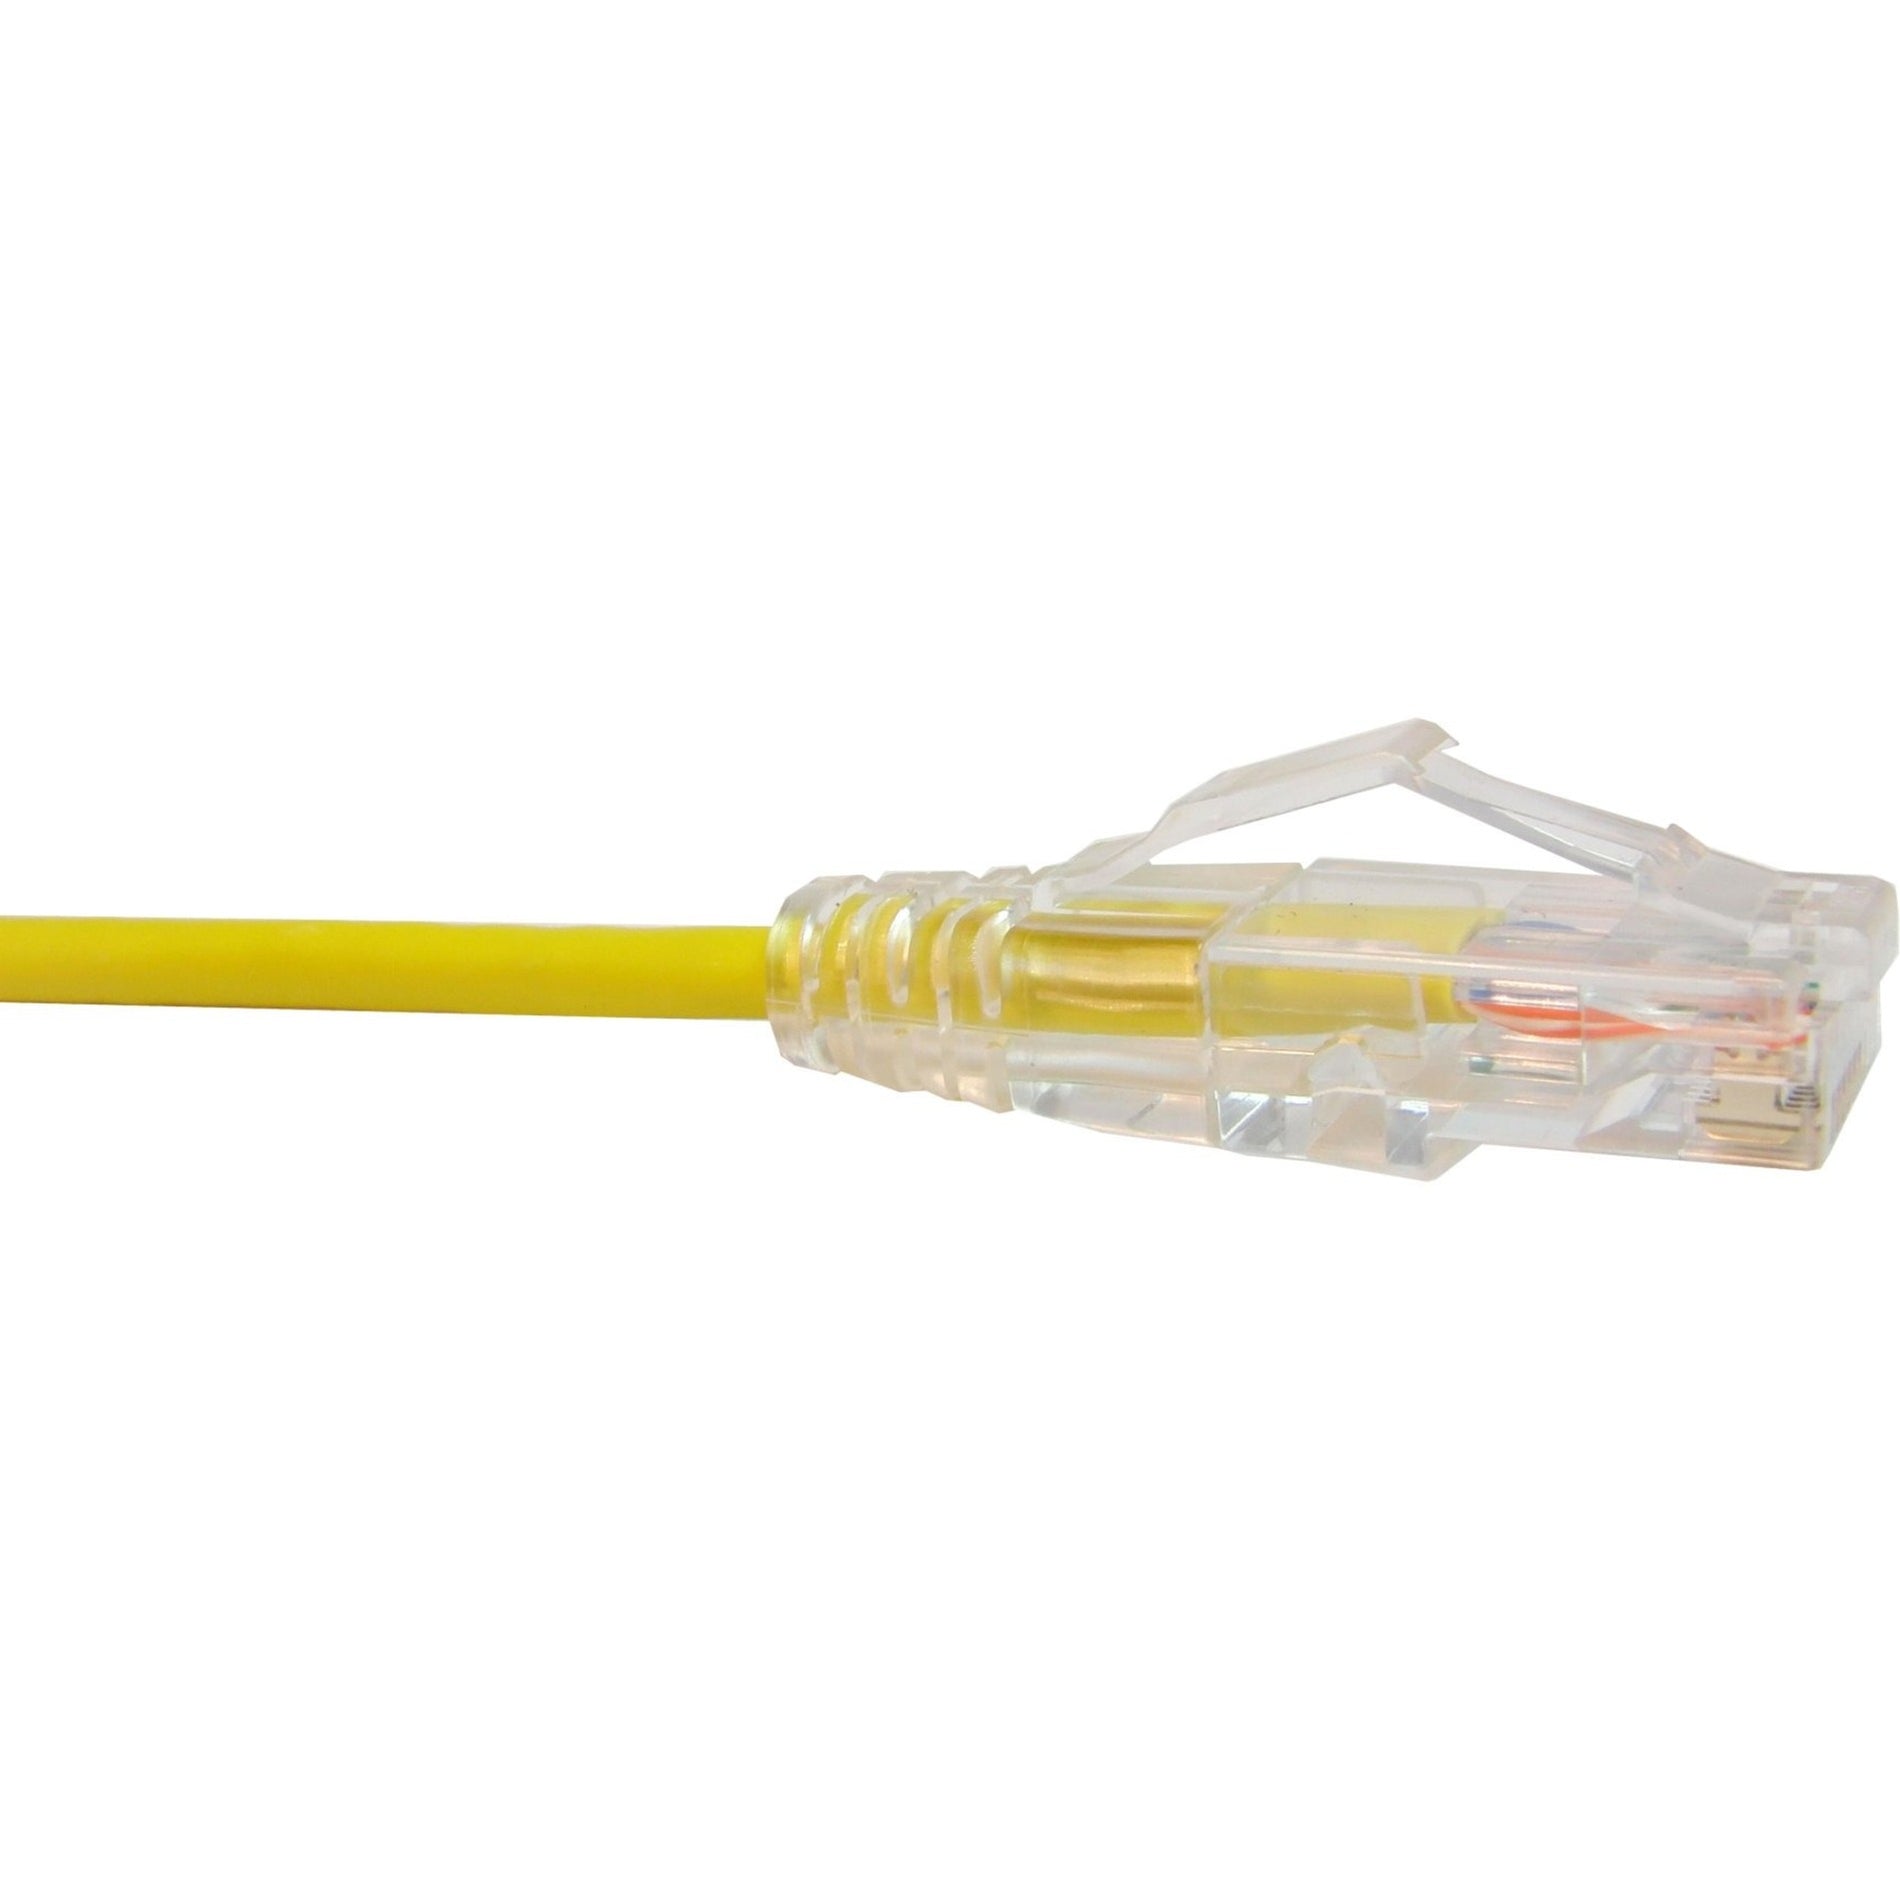 Unirise CS6-07F-YLW Clearfit Slim Cat6 Patch Cable, Snagless, Yellow, 7ft